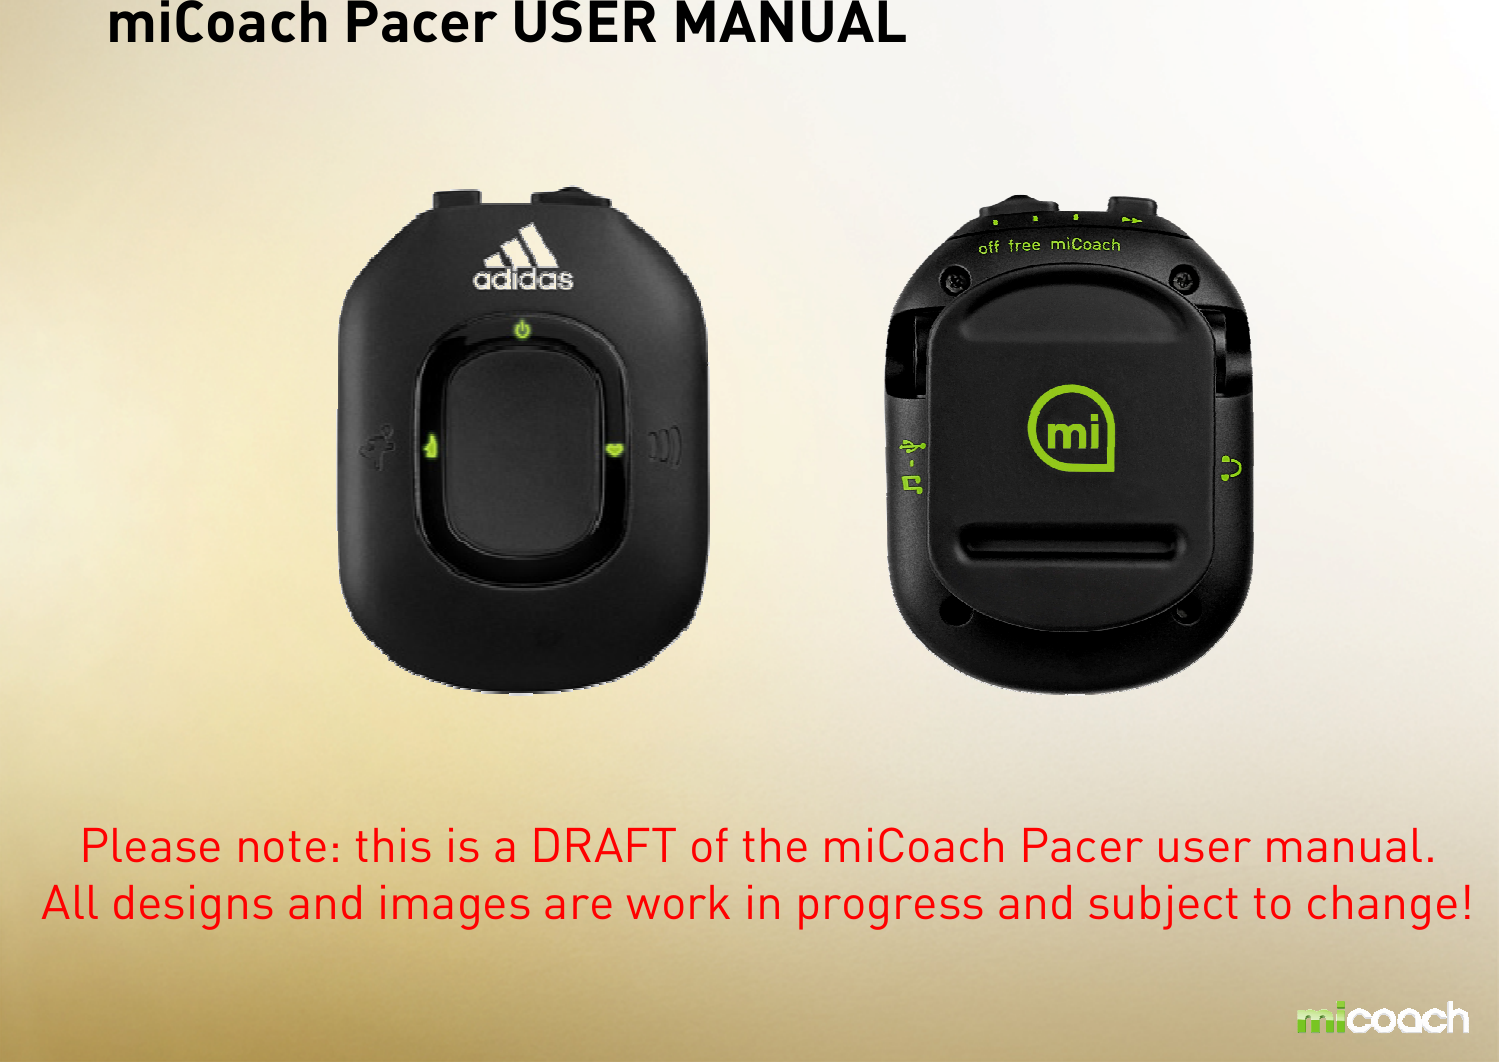 miCoach Pacer USER MANUAL Please note: this is a DRAFT of the miCoach Pacer user manual.All designs and images are work in progress and subject to change!